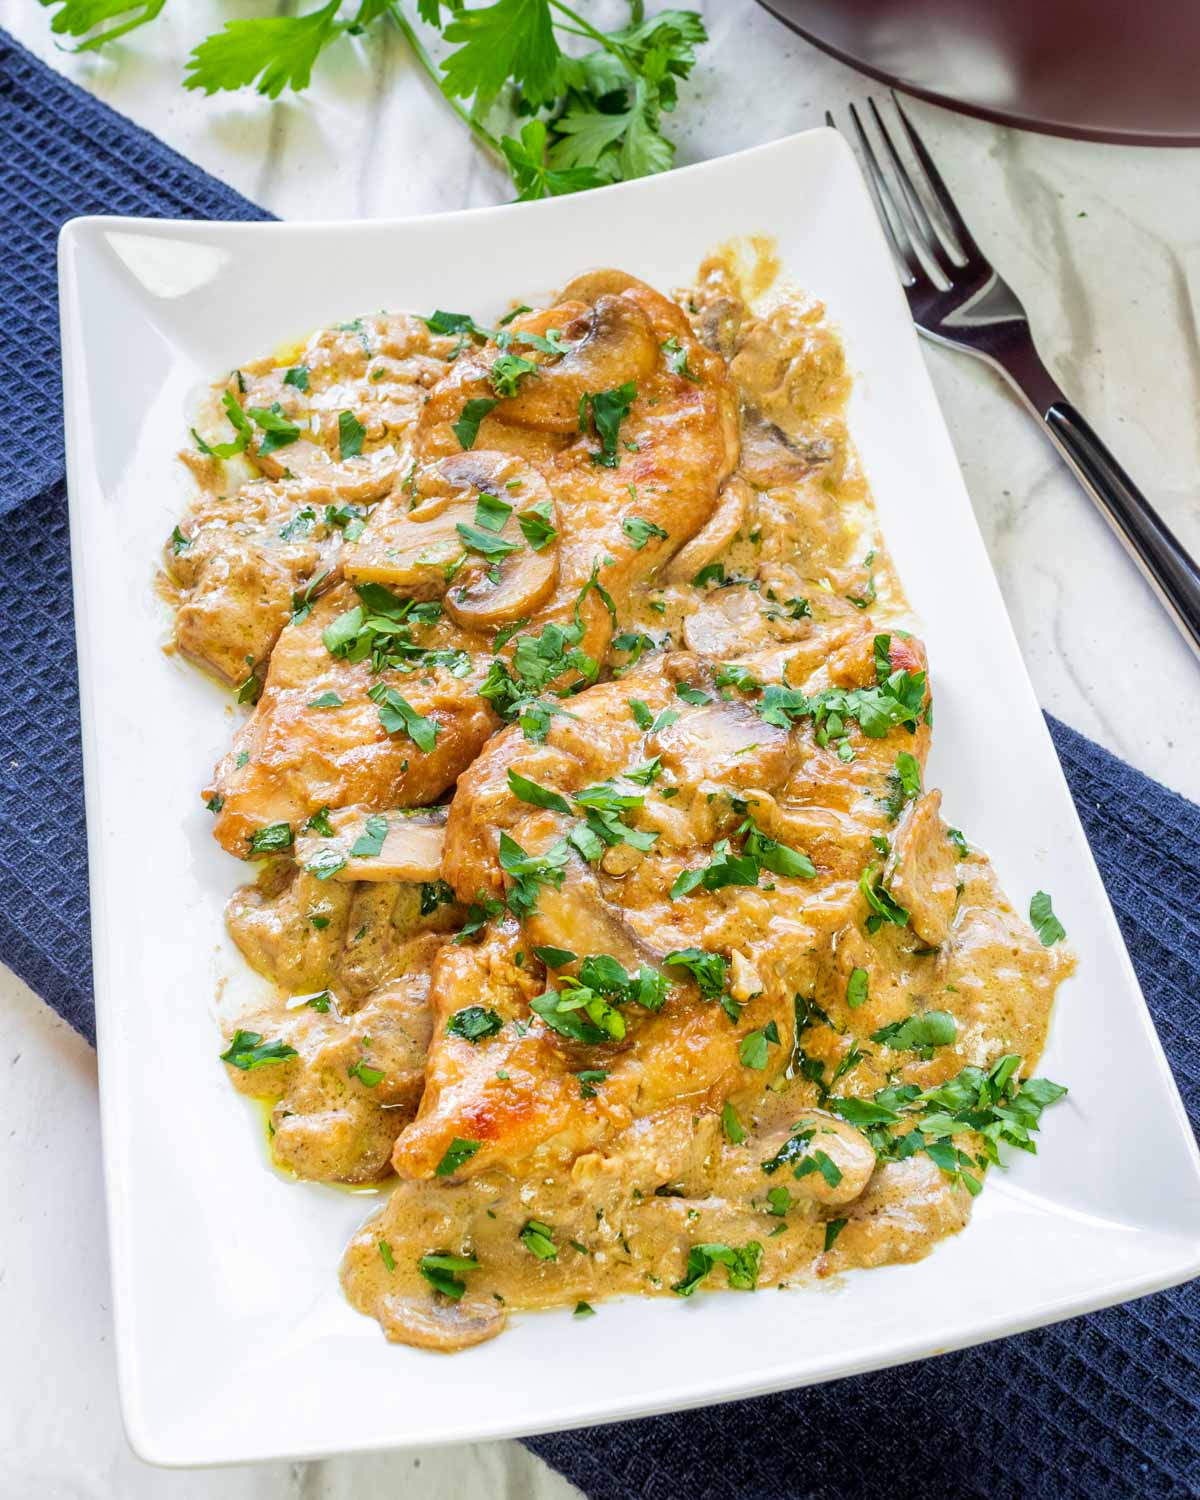 chicken marsala in a rectangular plate garnished with parsley.